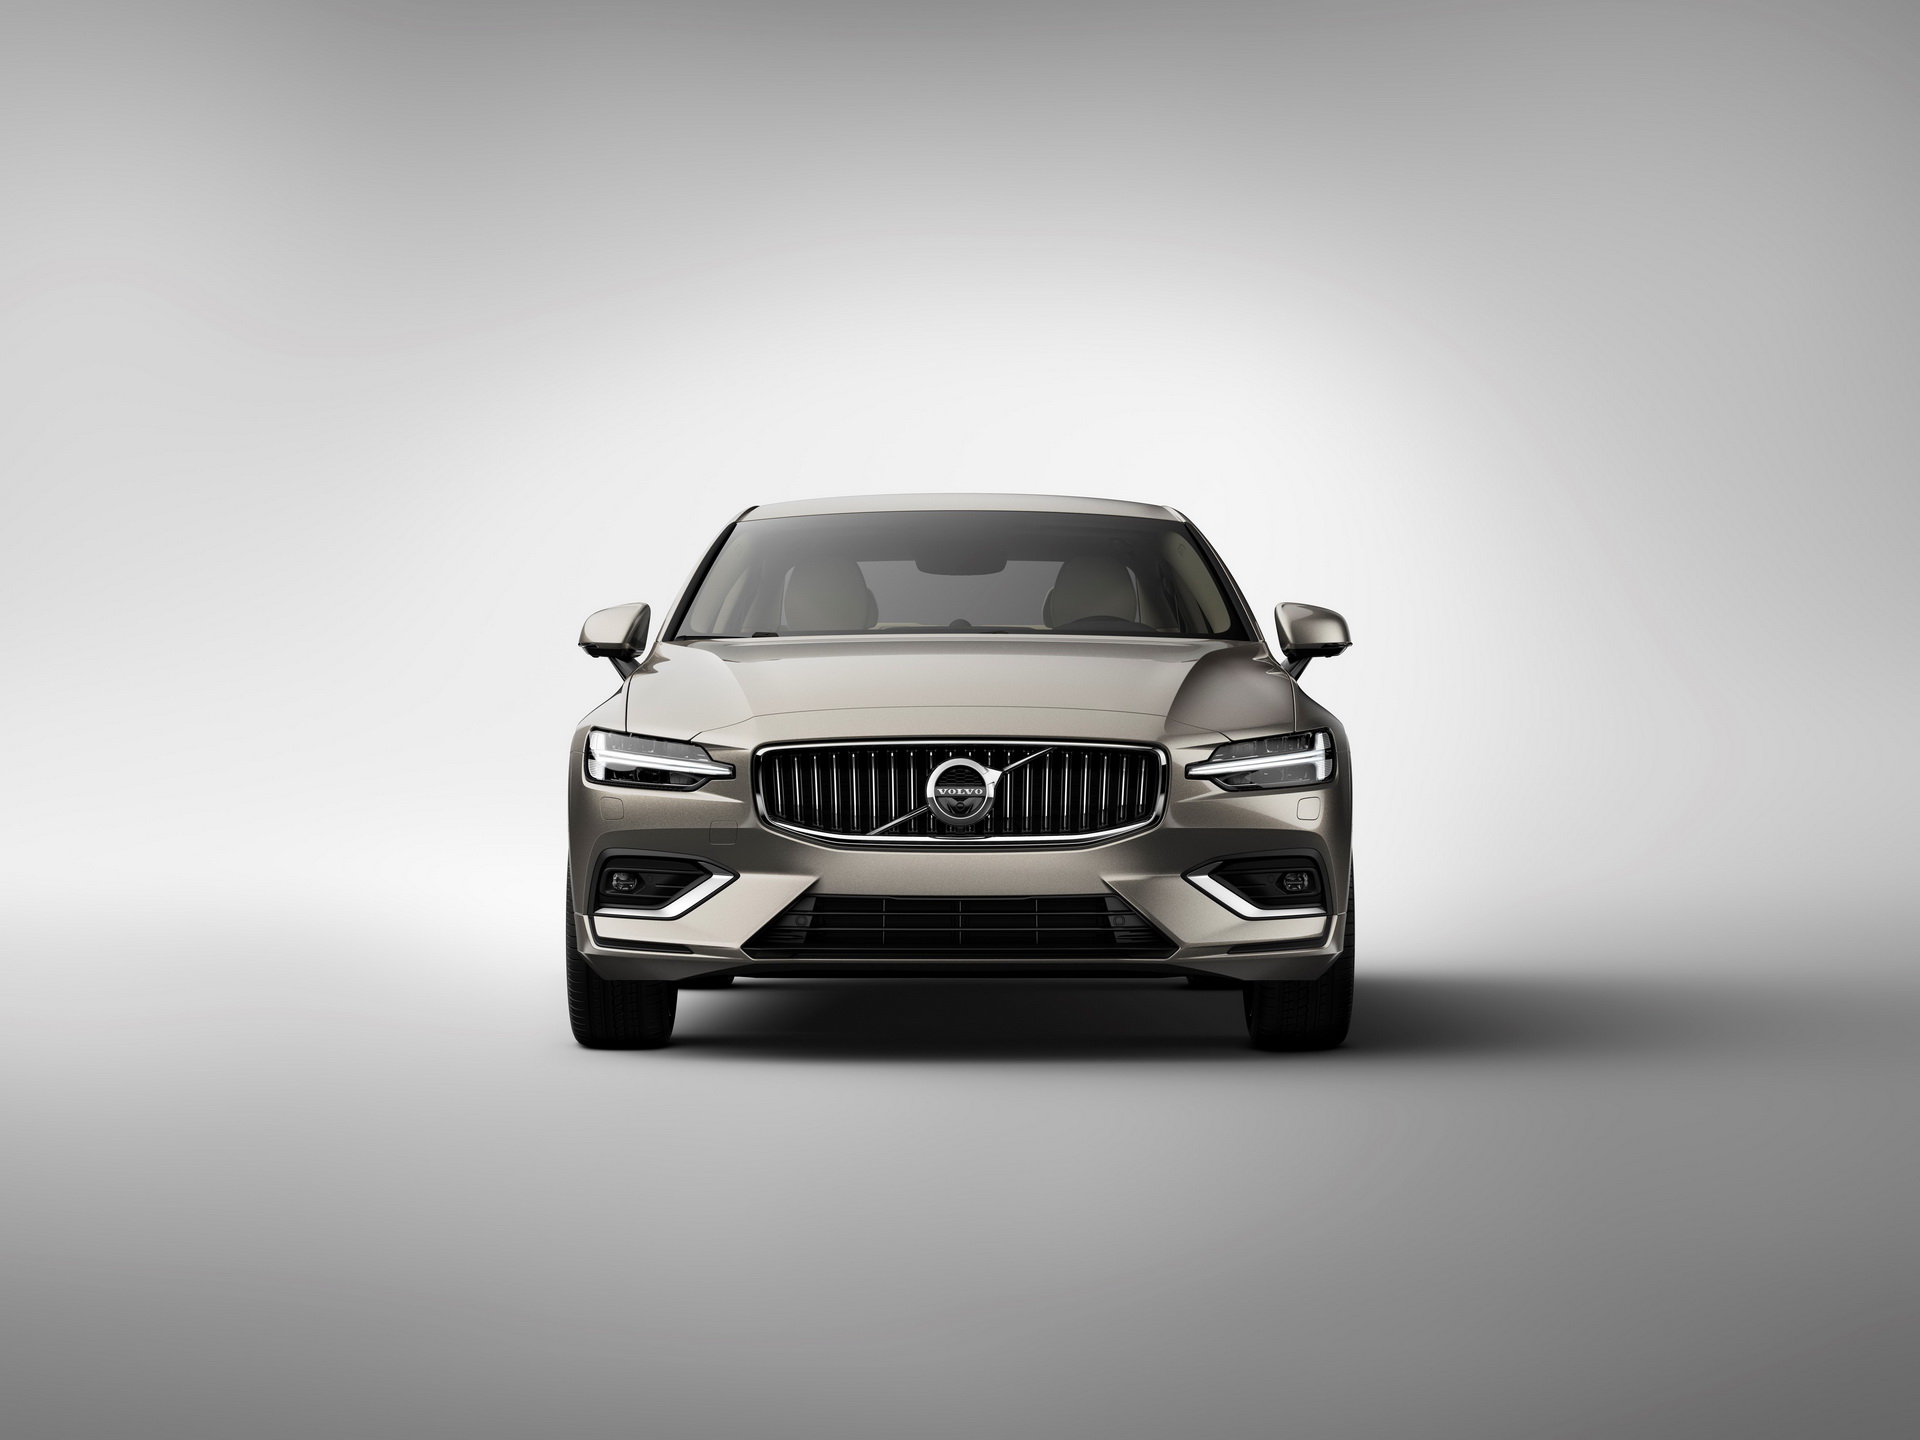 [Image: 1926f6a9-2019-volvo-s60-unveiled-6.jpg]